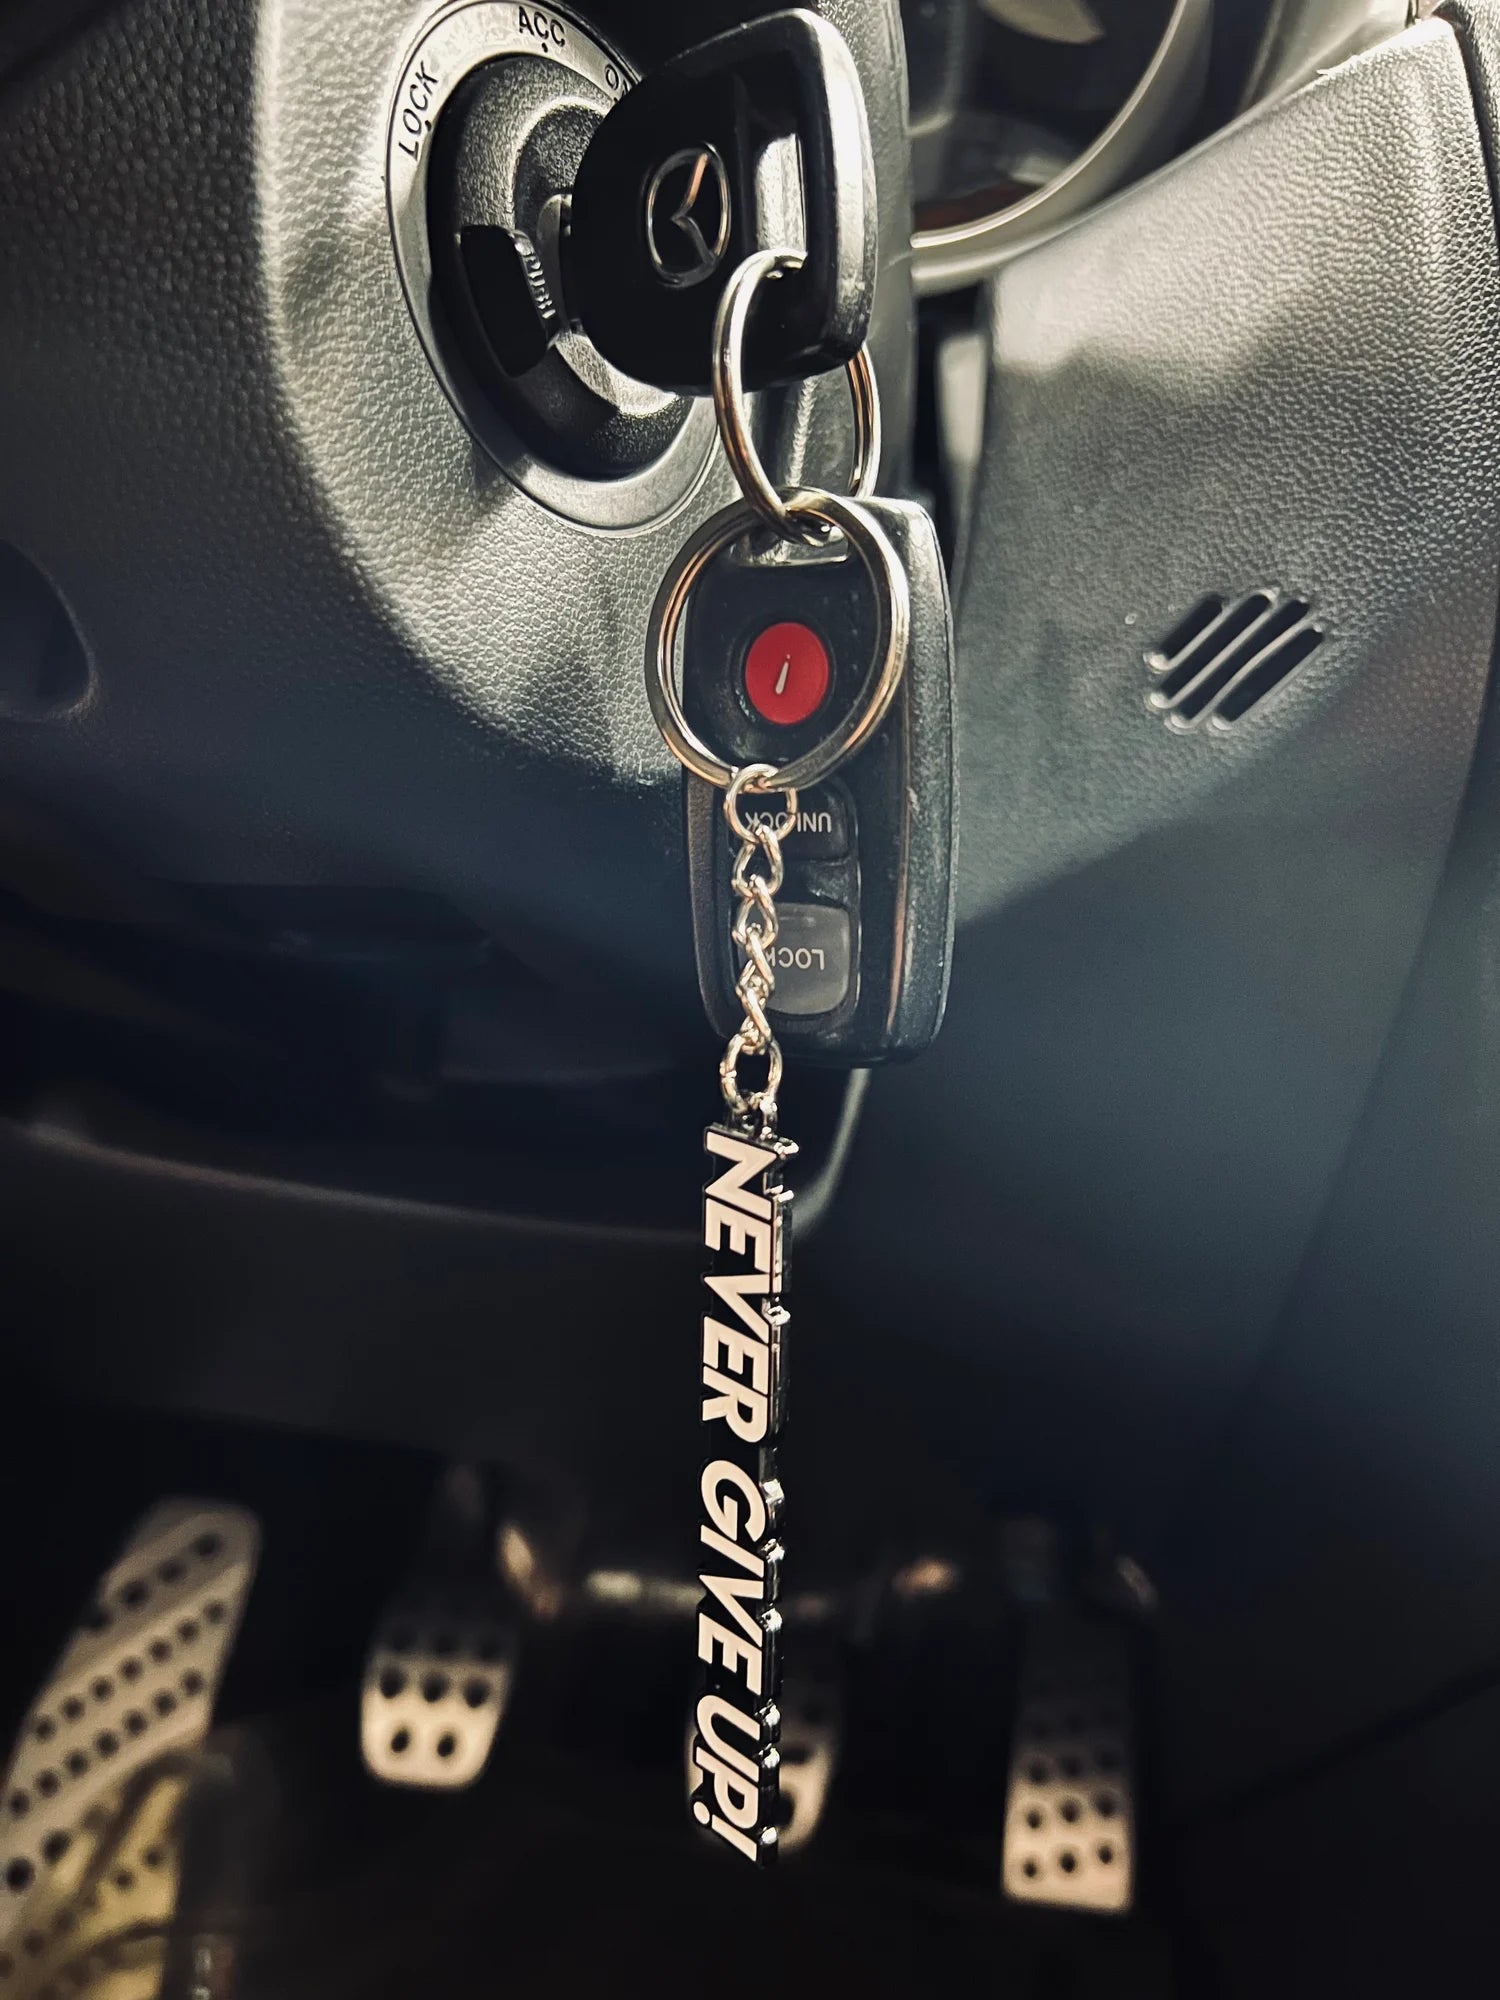 NEVER GIVE UP! - METAL KEYCHAIN